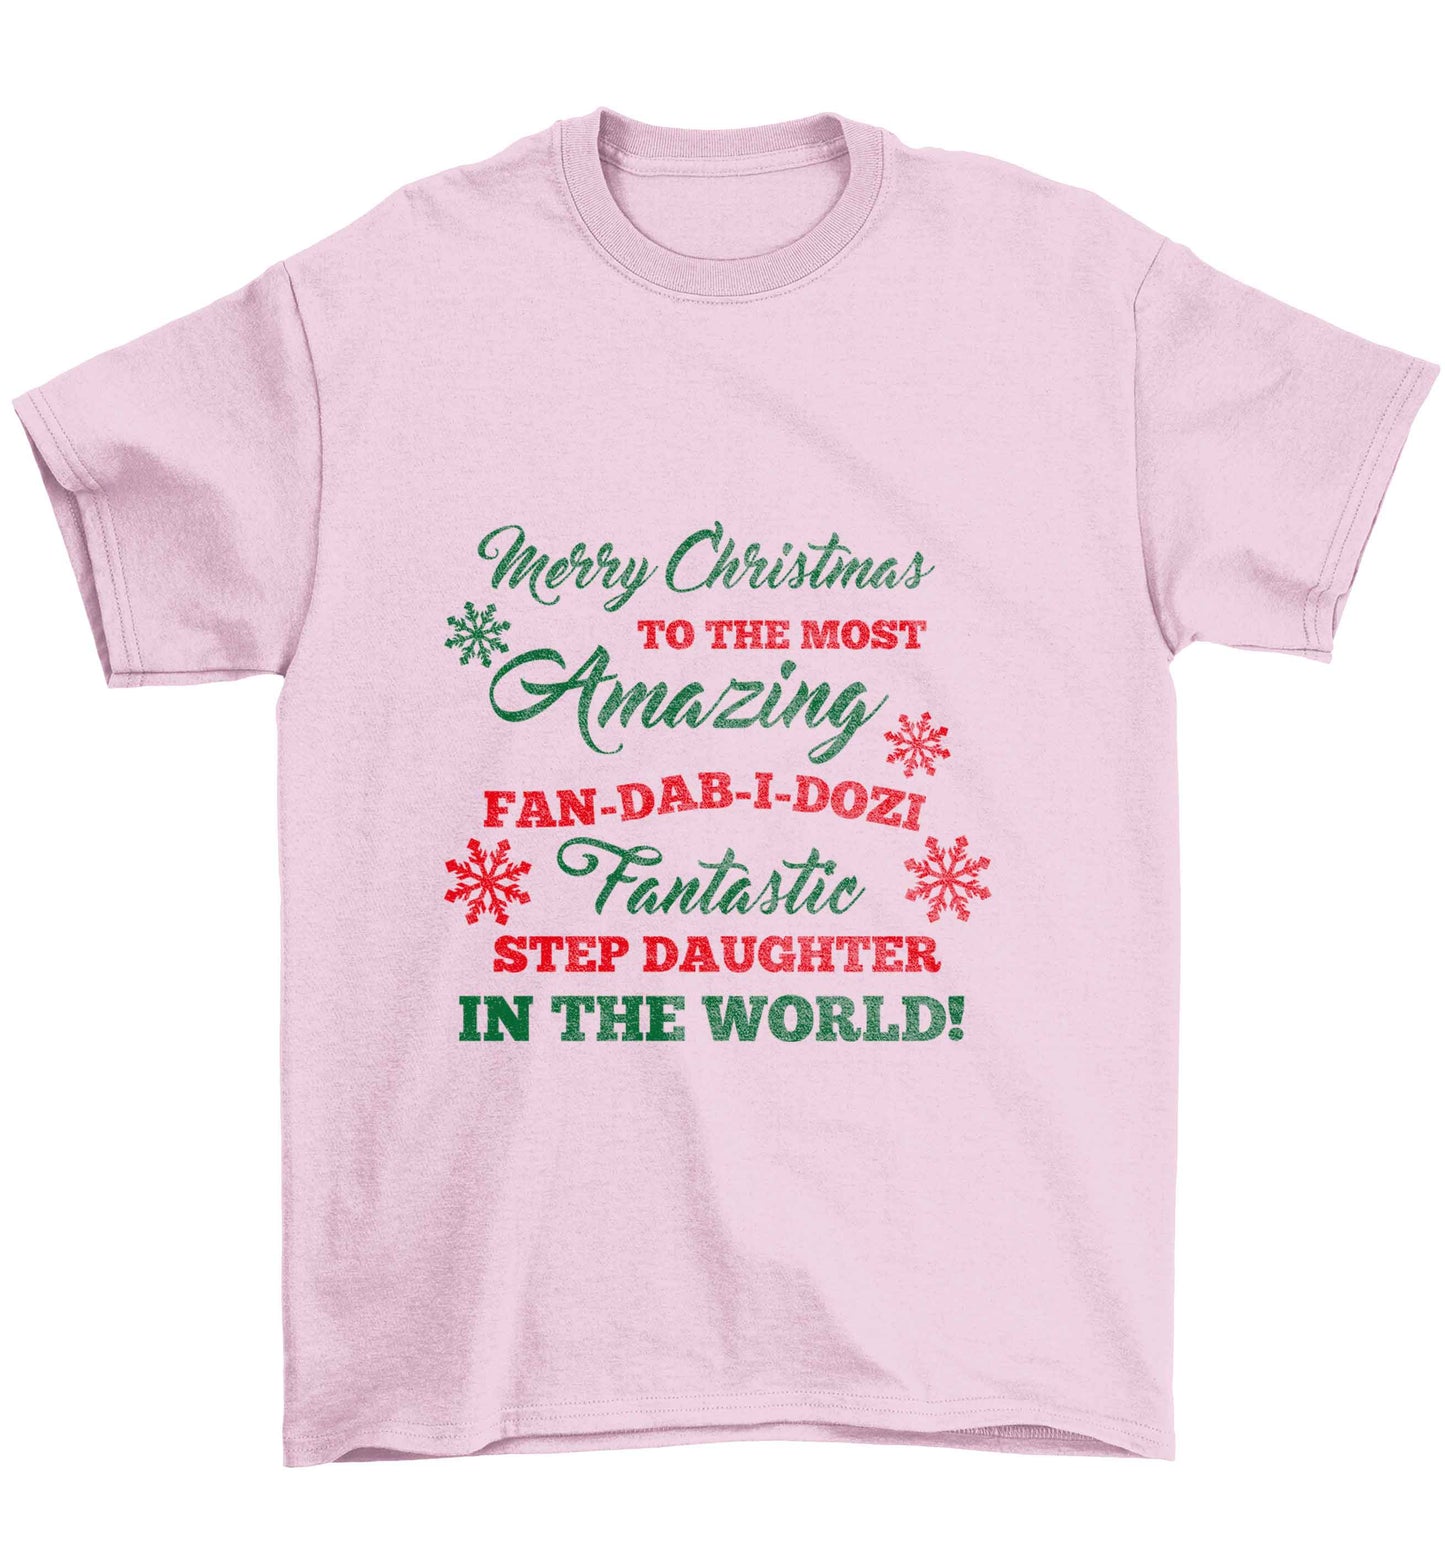 Merry Christmas to the most amazing fan-dab-i-dozi fantasic Step Daughter in the world Children's light pink Tshirt 12-13 Years